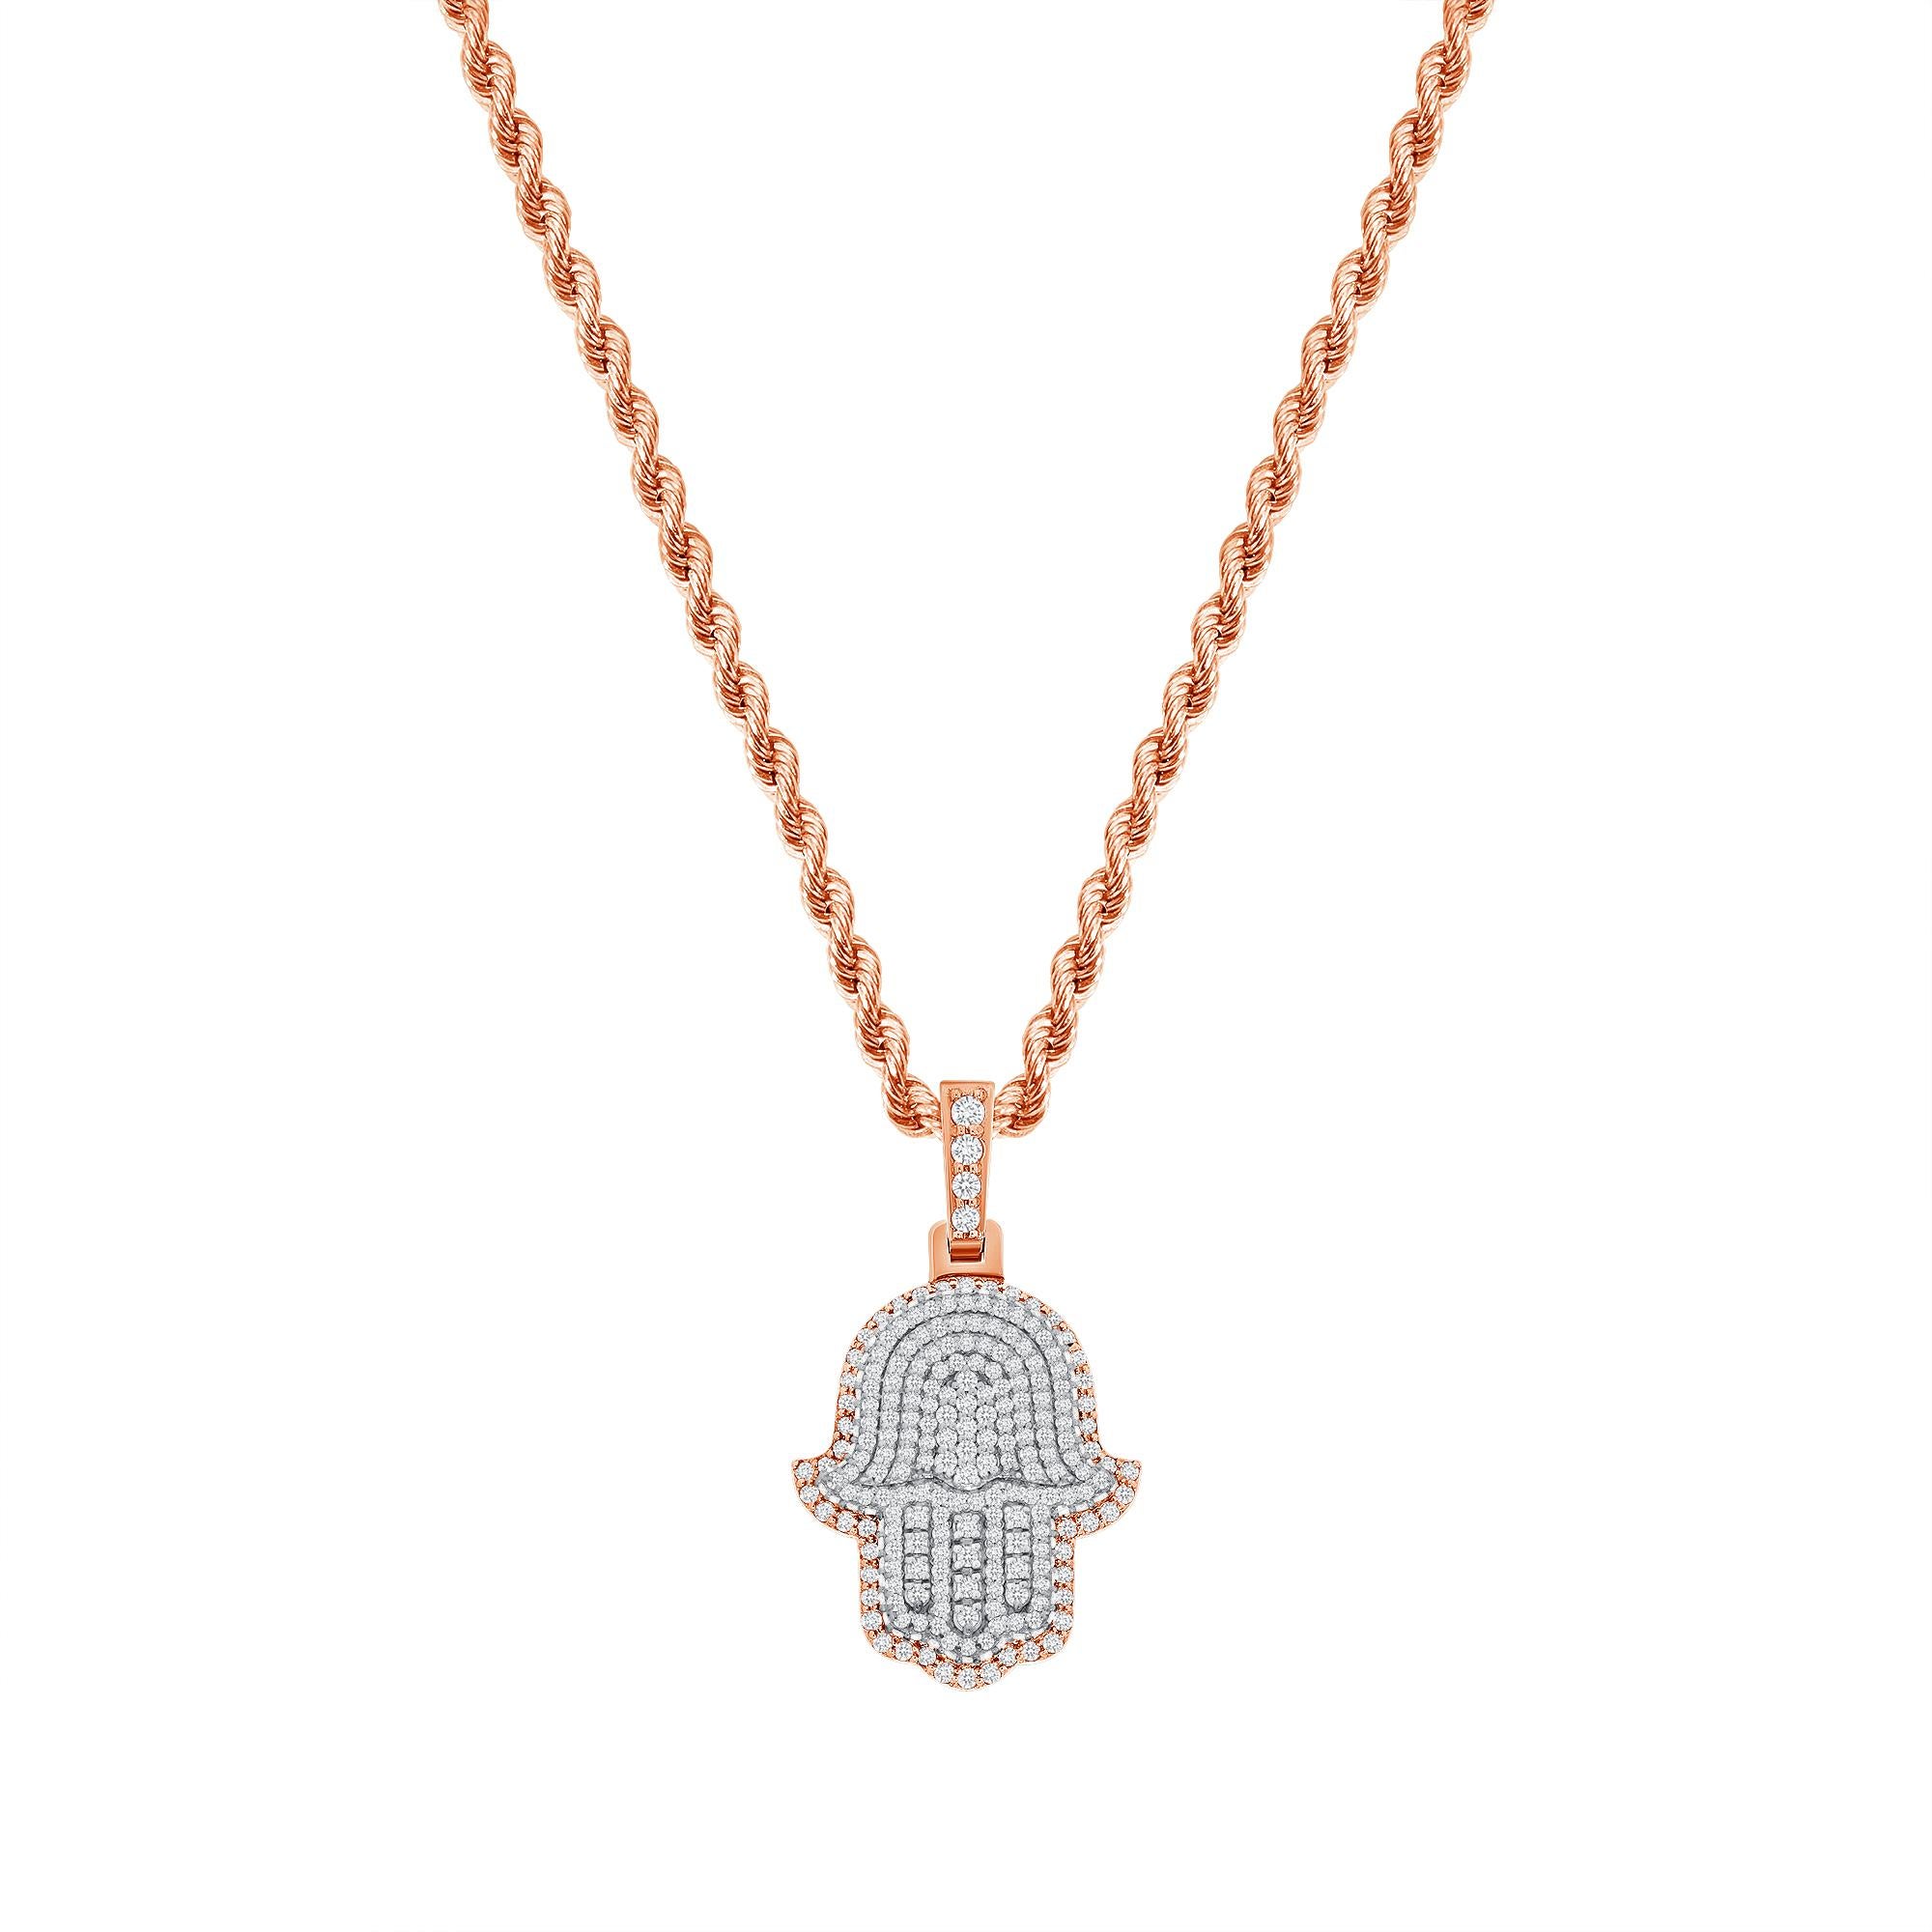 This Hamsa diamond necklace provides both a spiritual and fashionable on trend look. 

Metal: 14k Gold
Diamond Cut: Round
Total Diamond Carats: 2 Carats
Diamond Clarity: VS
Diamond Color: F-G
Necklace Length: 20 Inches
Color: Rose Gold
